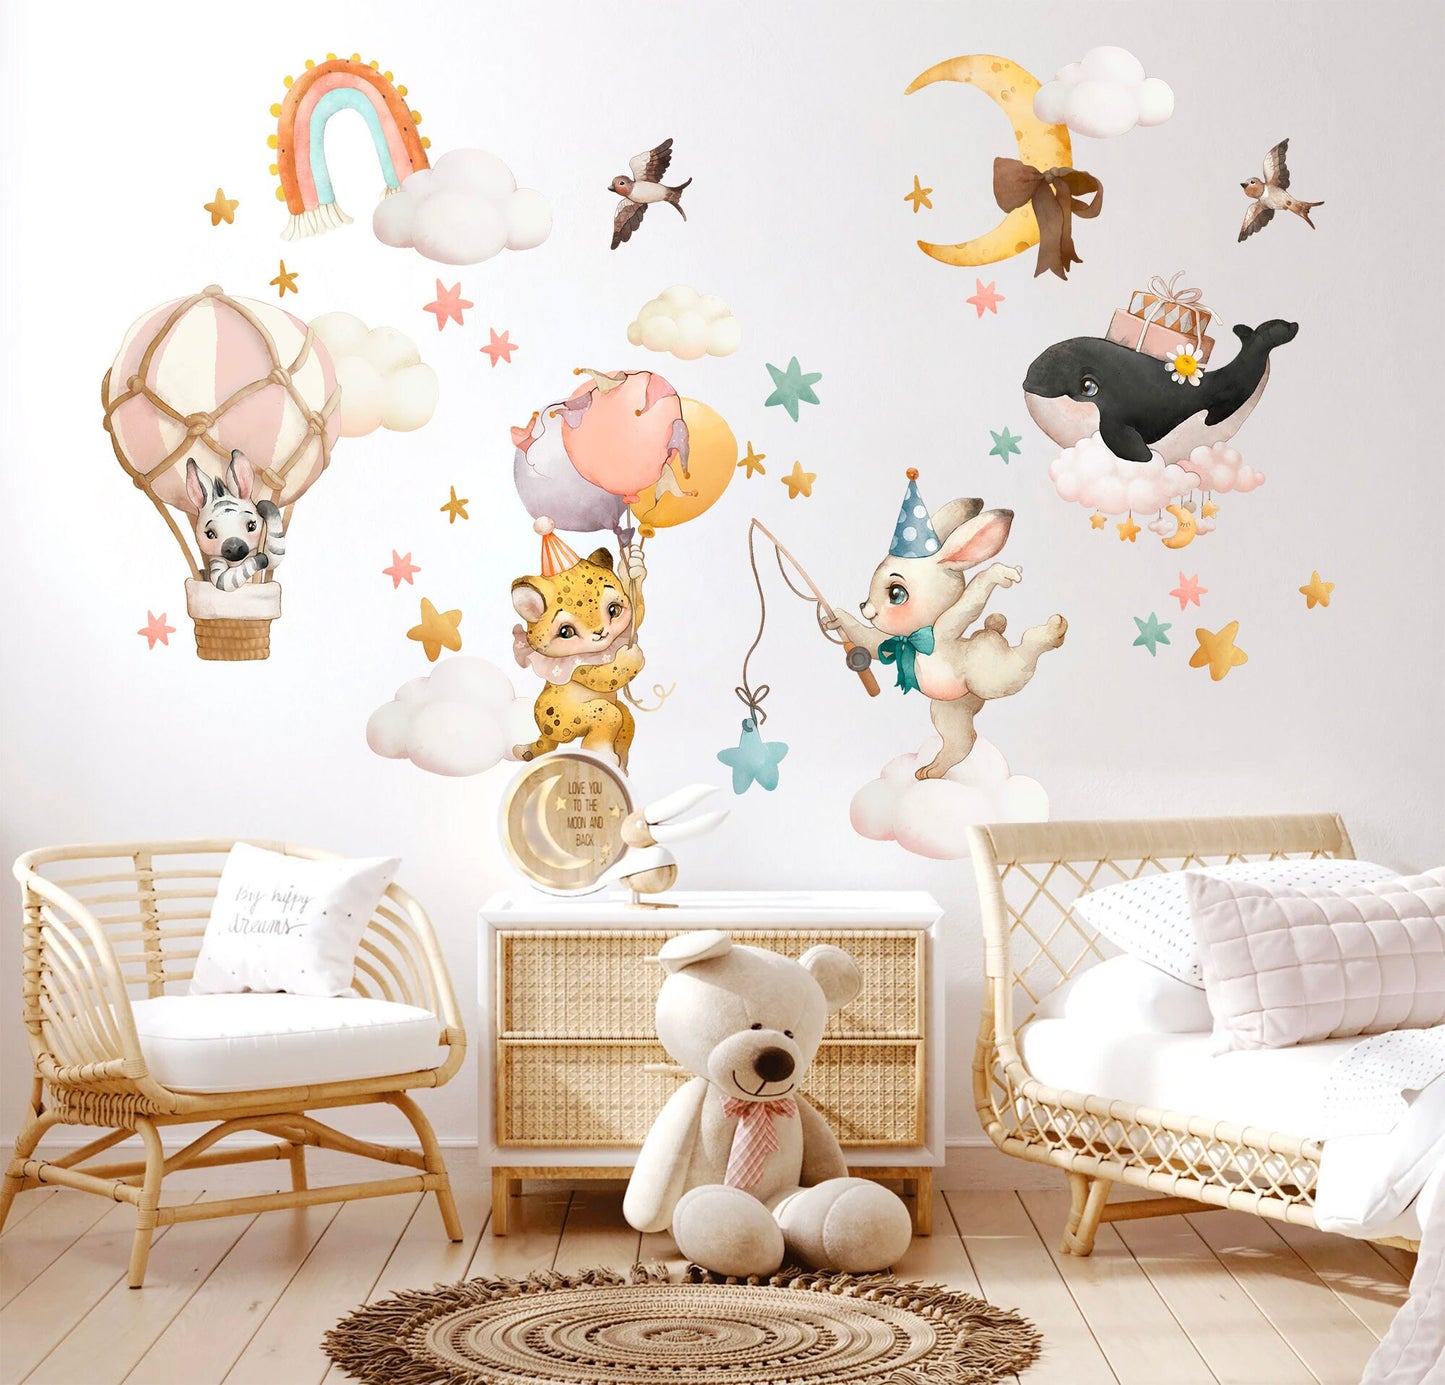 Baby Animals Riding Clouds and Hot Air Balloons into Starry Sky - Whale Zebra Leopard Rabbit Rainbow - Removable Wall Decal - BR143